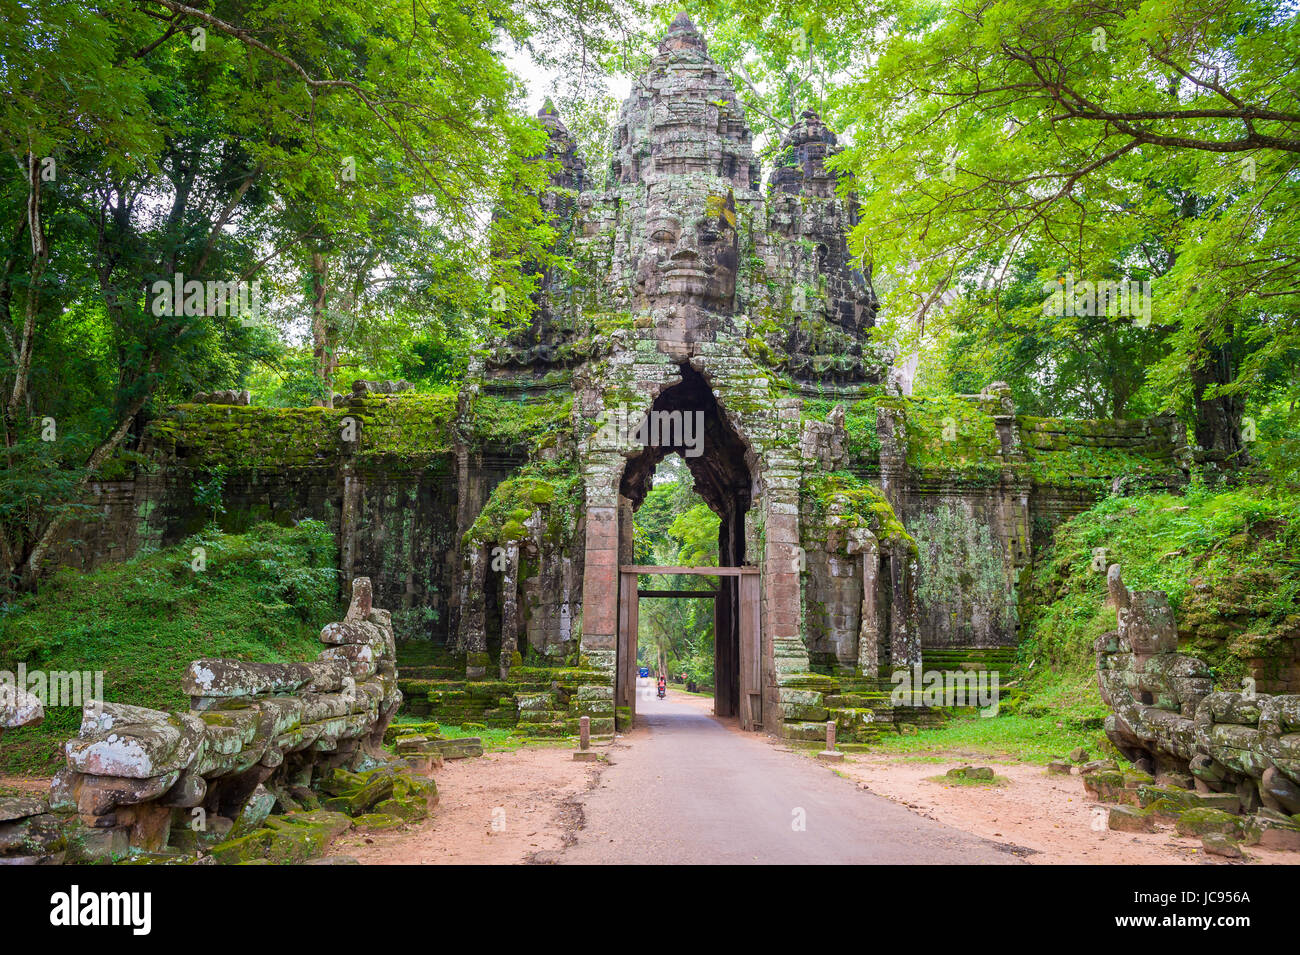 Scenic jungle view of the Angkor Thom North Gate at the Angkor Temple complex near Siem Reap, Cambodia Stock Photo